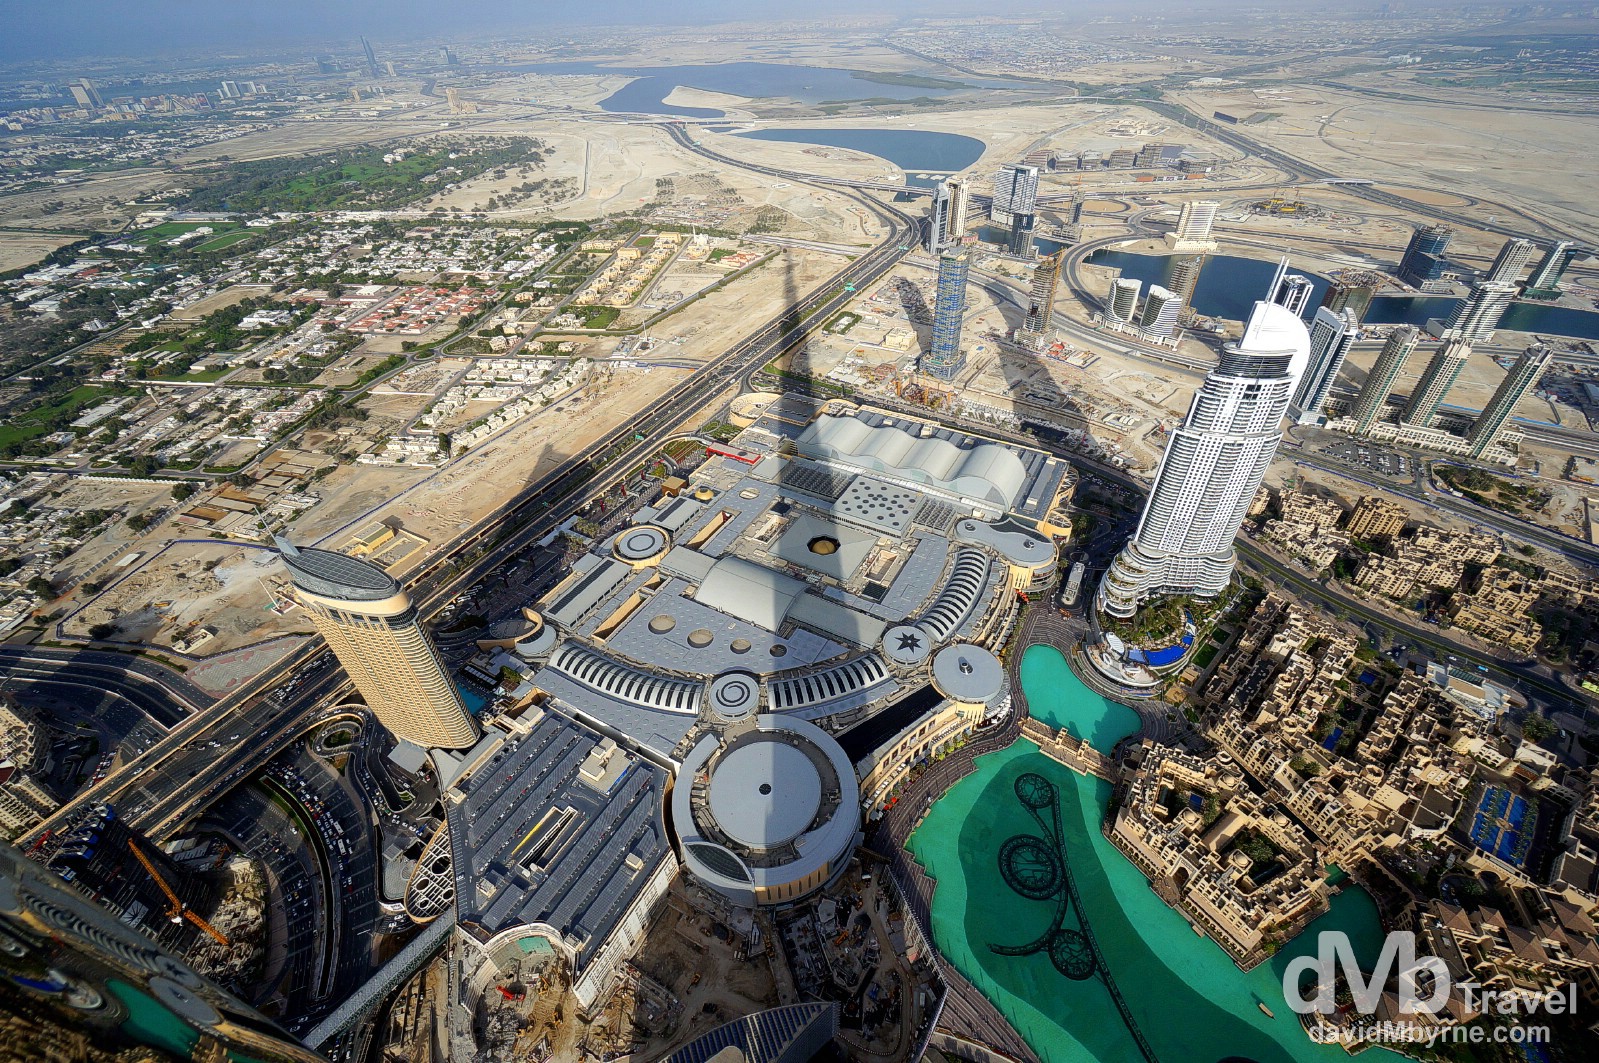 The 829.8 metre Burj Khalifa, the world's tallest building, casts a shadow over The Dubai Mall, the world's biggest & busiest shopping mall, as seen from At The Top, the 124th floor viewing deck. Dubai, UAE. April 18th, 2014. 